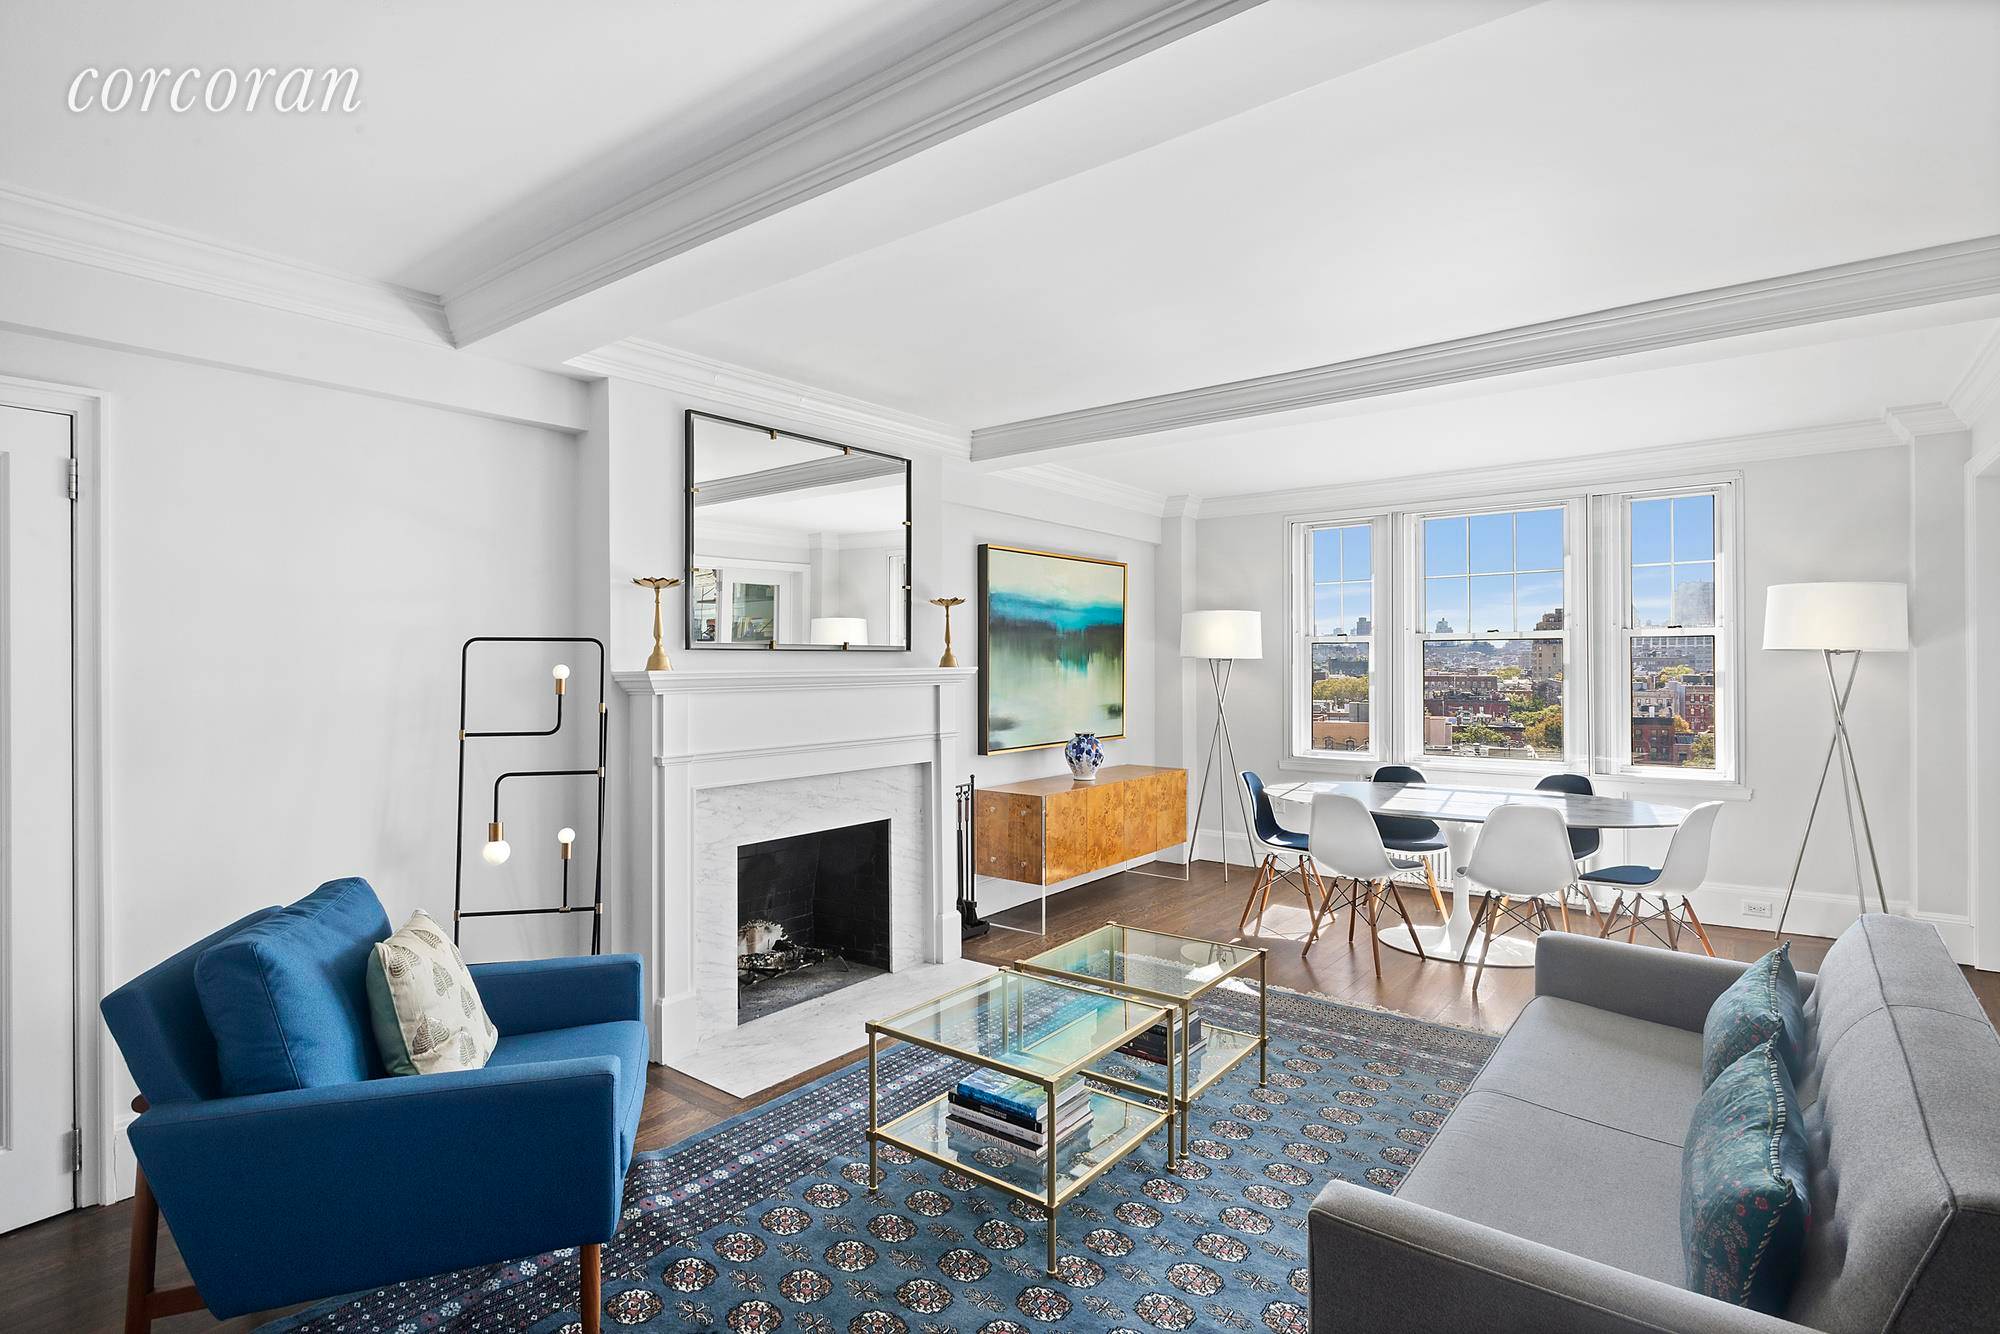 Located in the heart of the West Village, this quintessential New York Bing amp ; Bing prewar condo corner 2 bedroom and 2 bathroom home oozes charm.